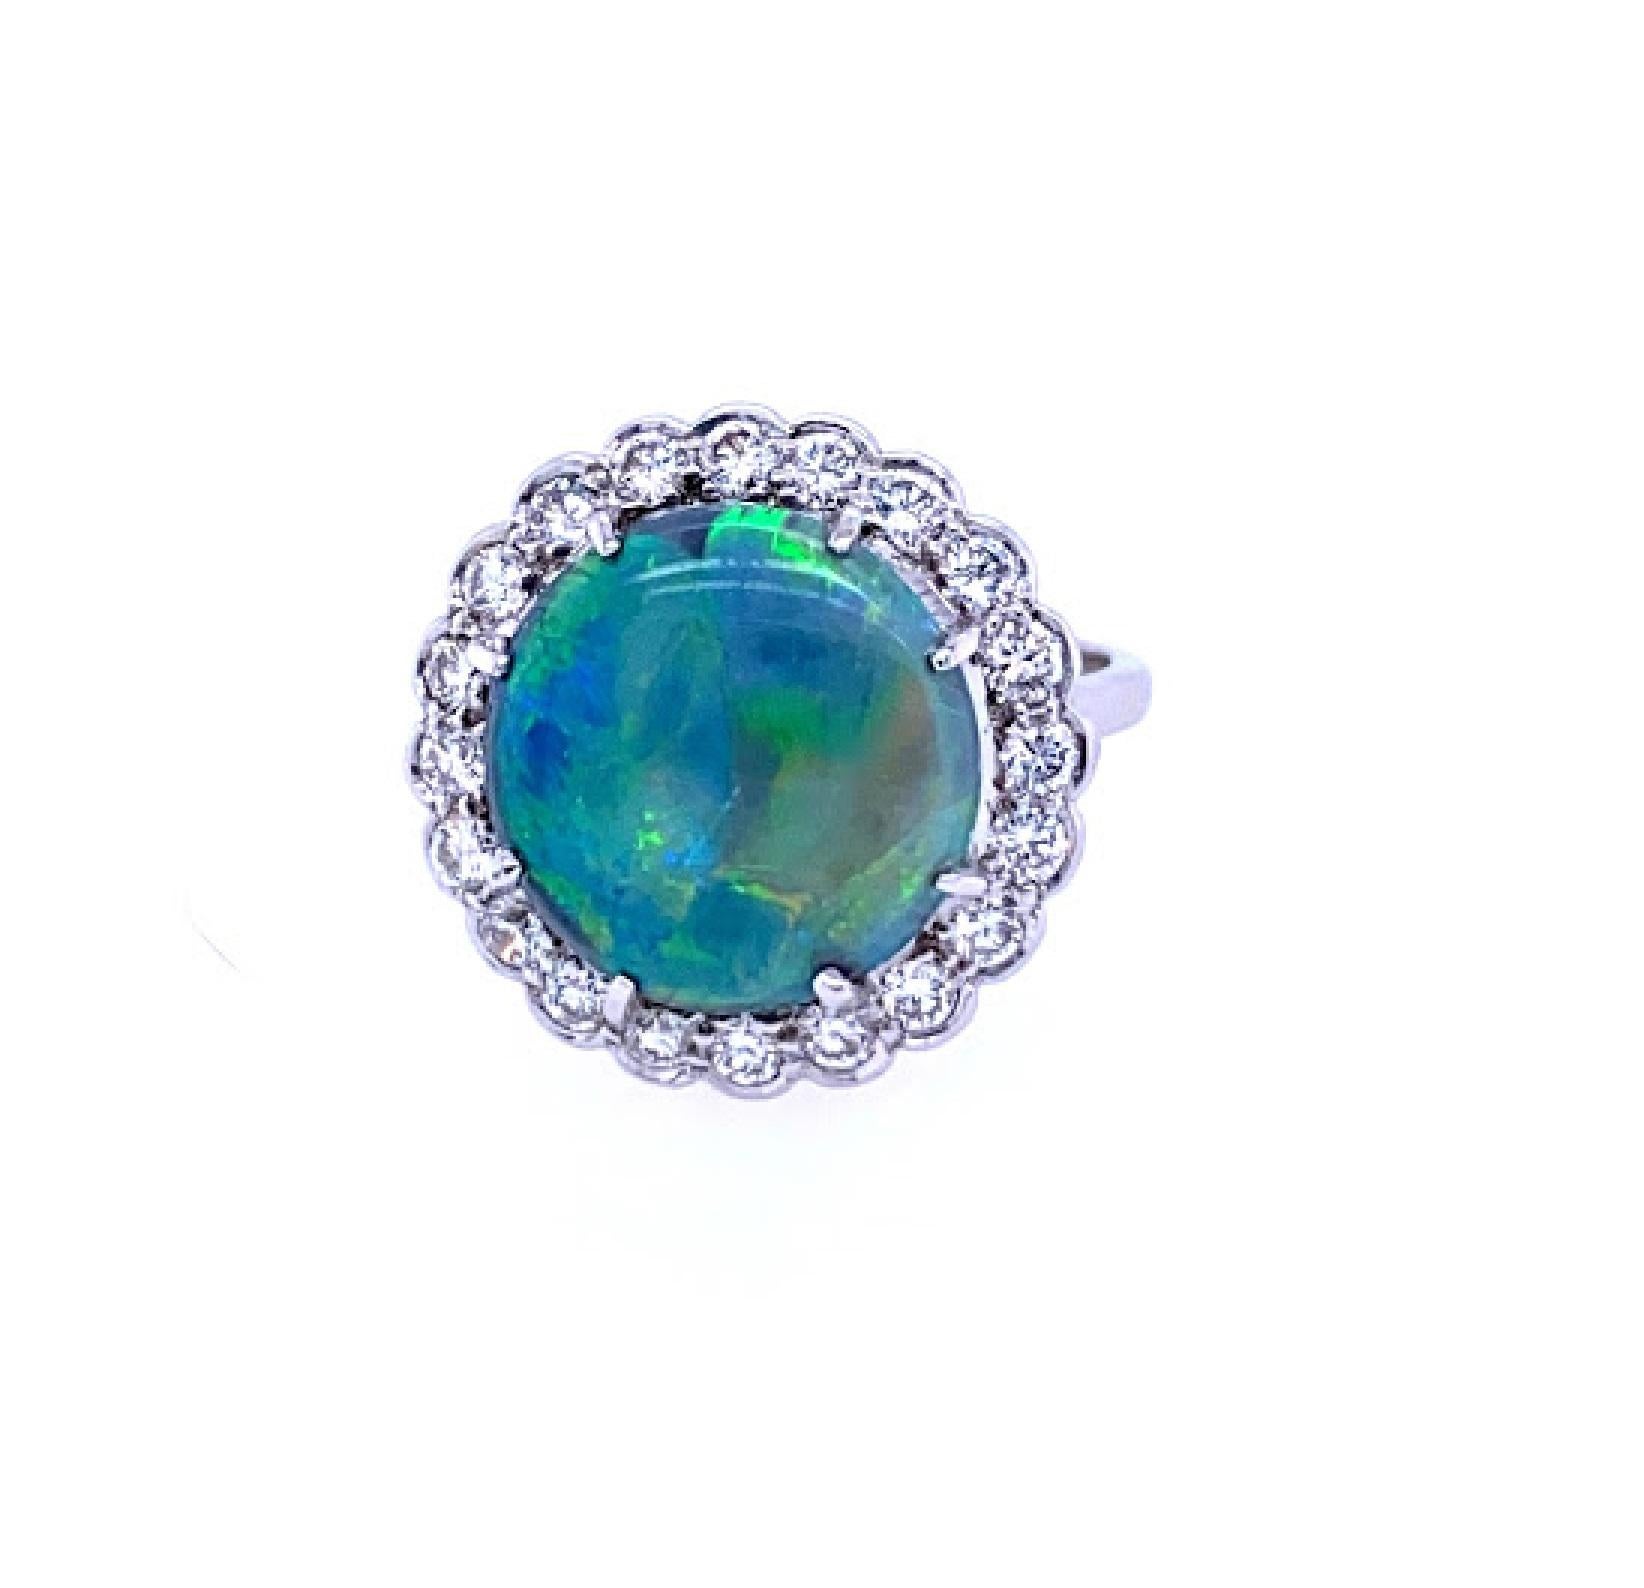 18 karat white gold (stamped 750) ring featuring a 14 mm round black opal ring. The ring’s halo contains 20 round brilliant diamonds weighing approximately 1.00 carat total weight, and the diamonds are in the G/H color range and the VS clarity